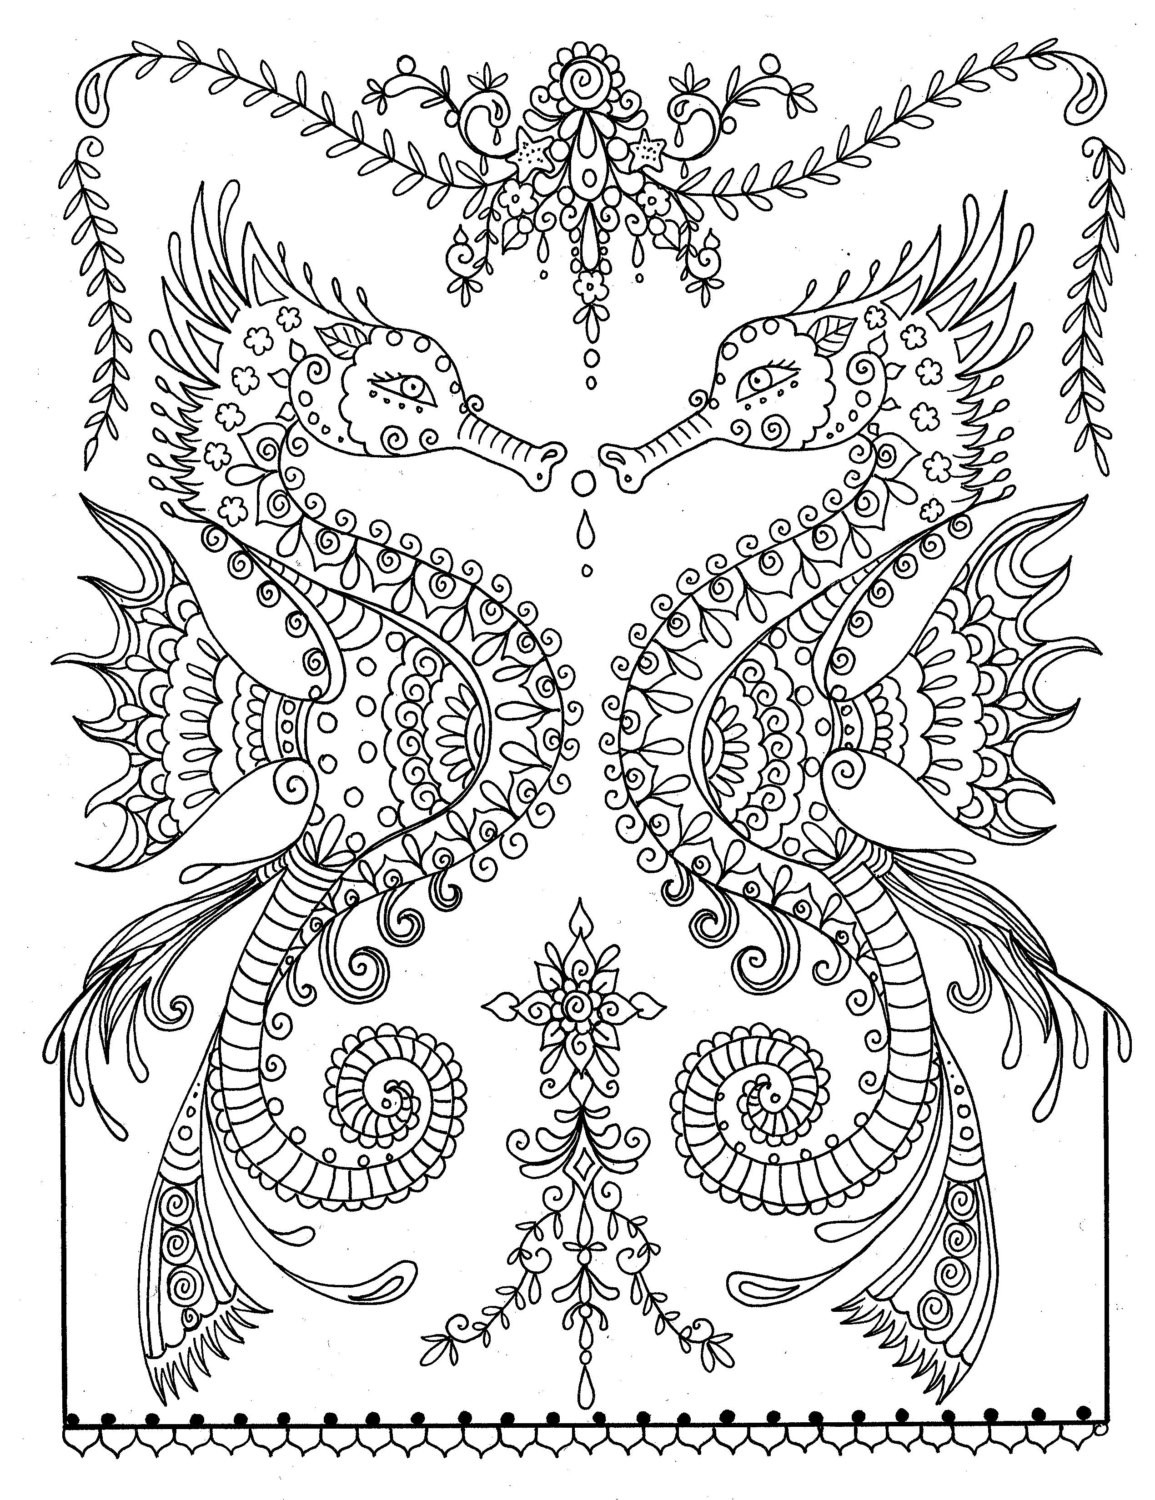 Ocean Adult Coloring Pages
 Printable Sea Horse Coloring Page Instant Download Adult